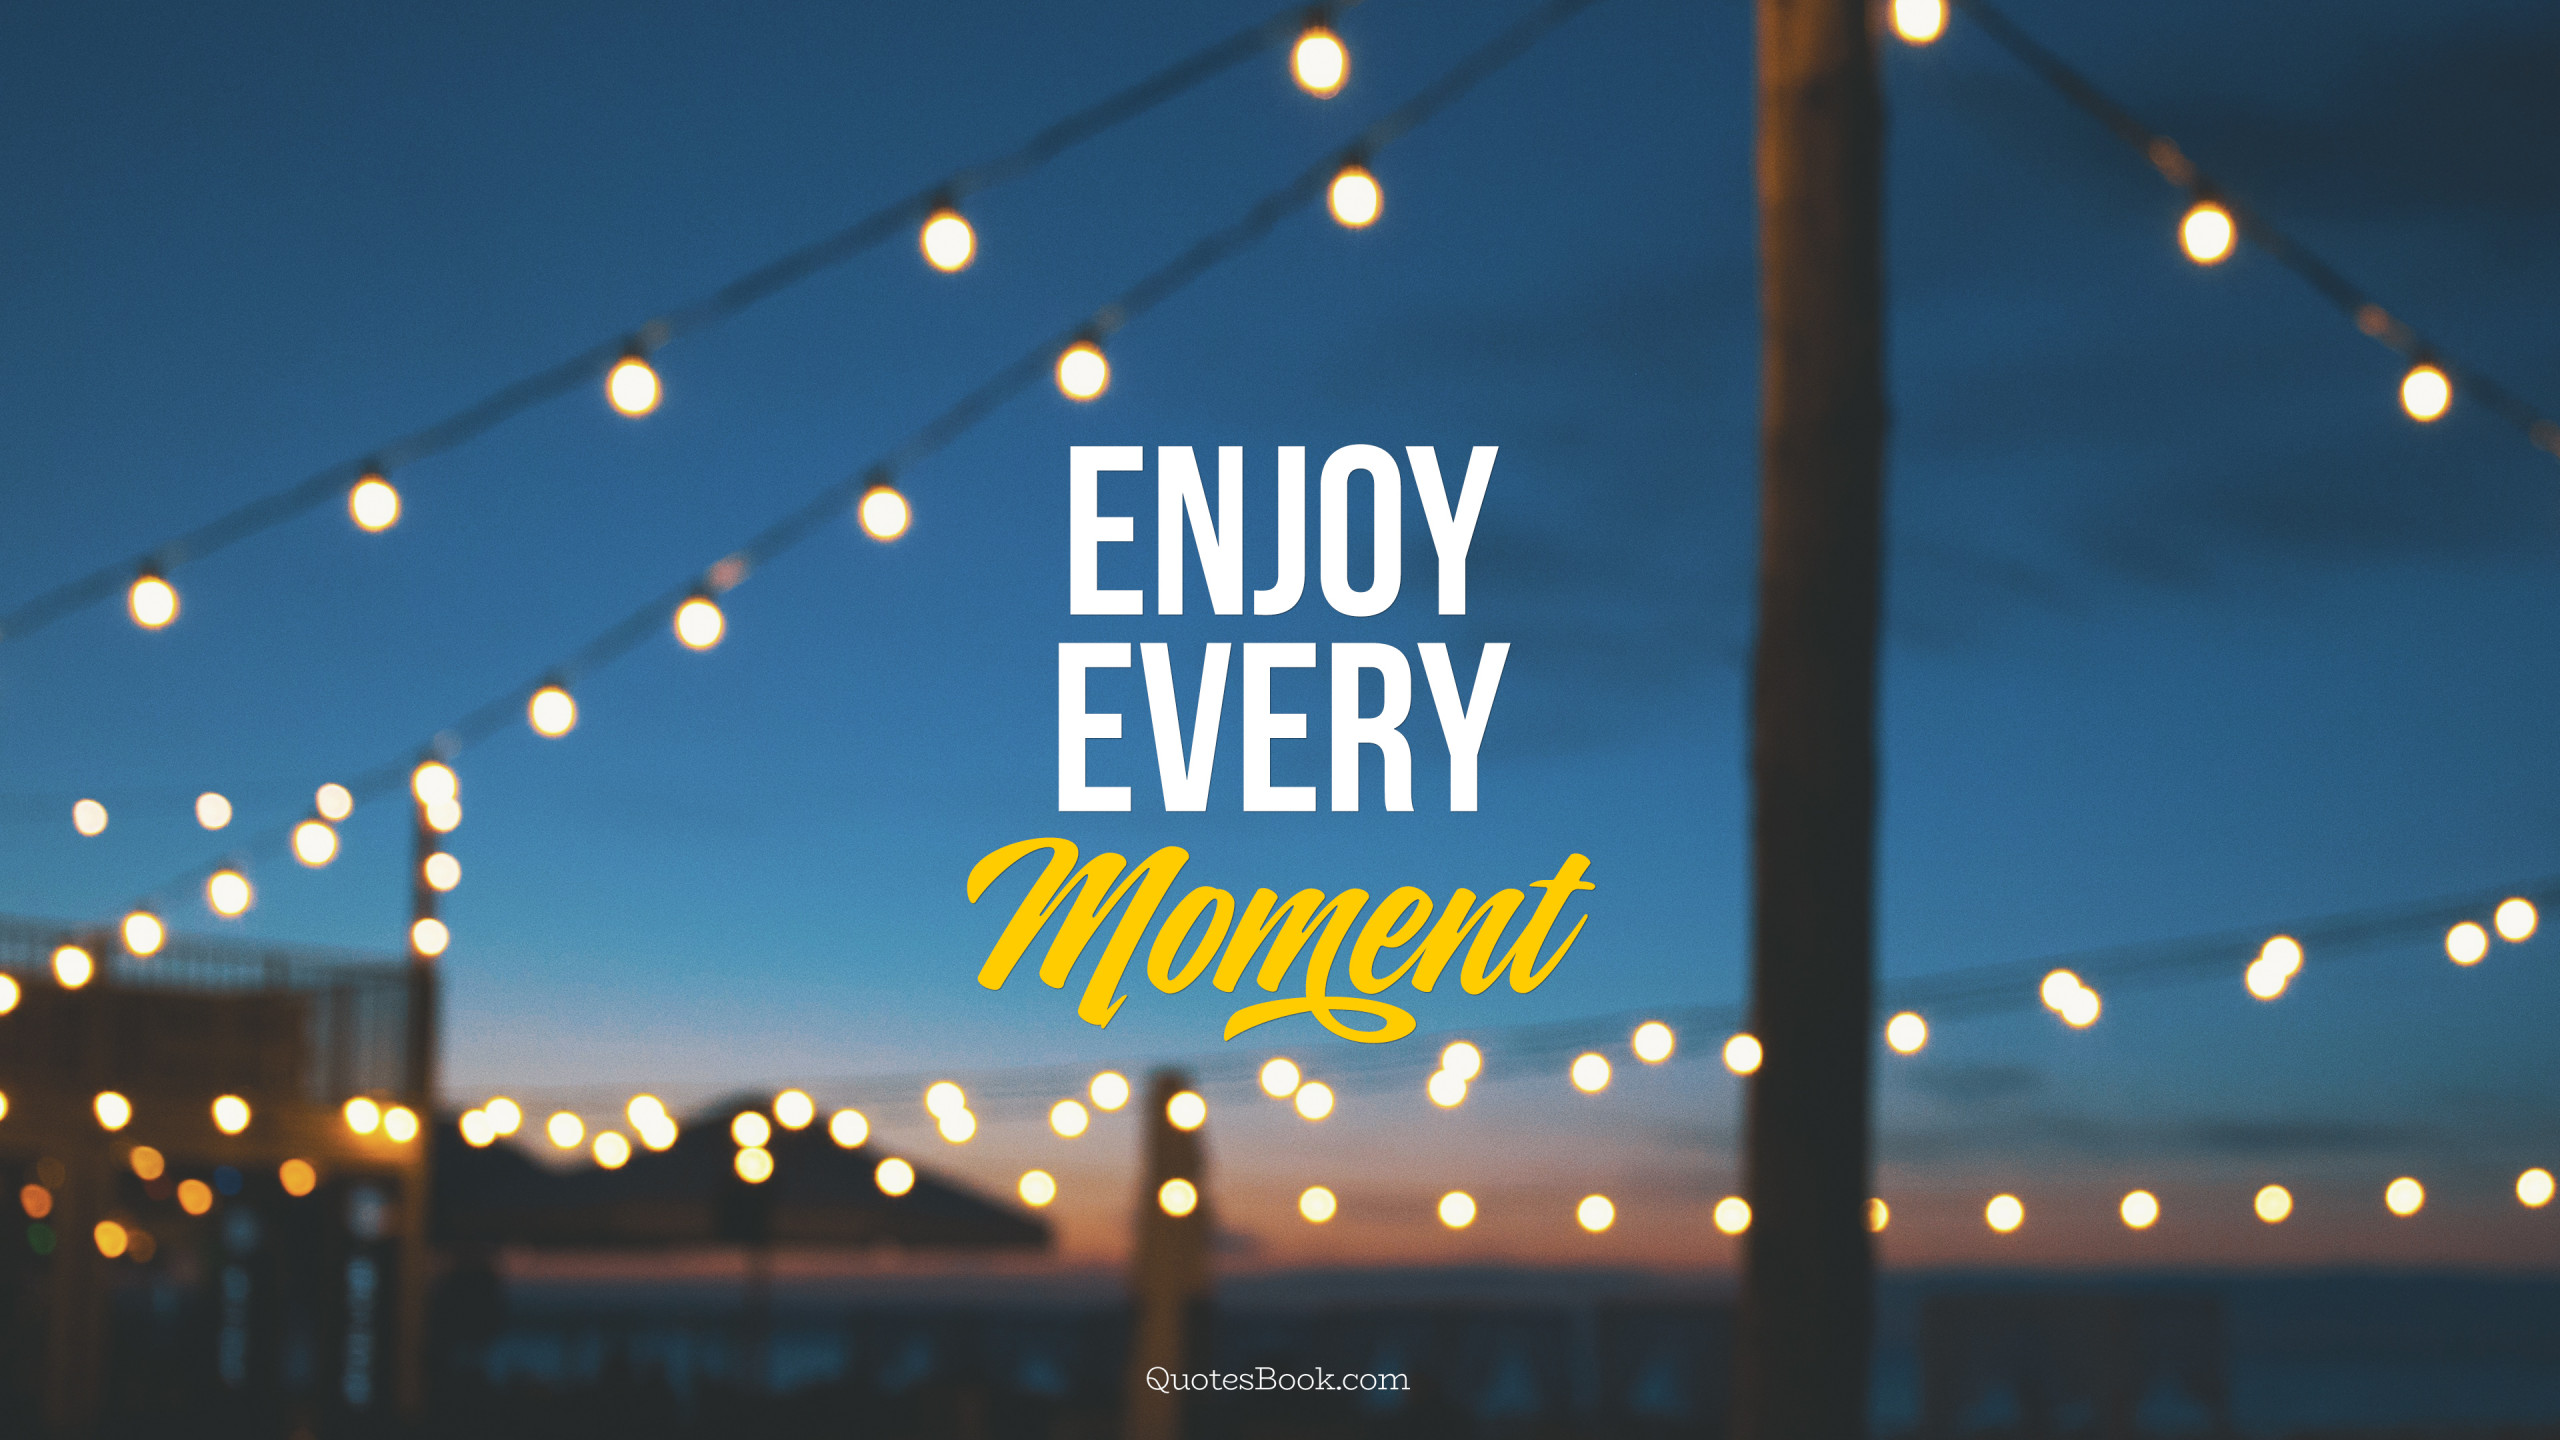 Enjoy every moment - QuotesBook